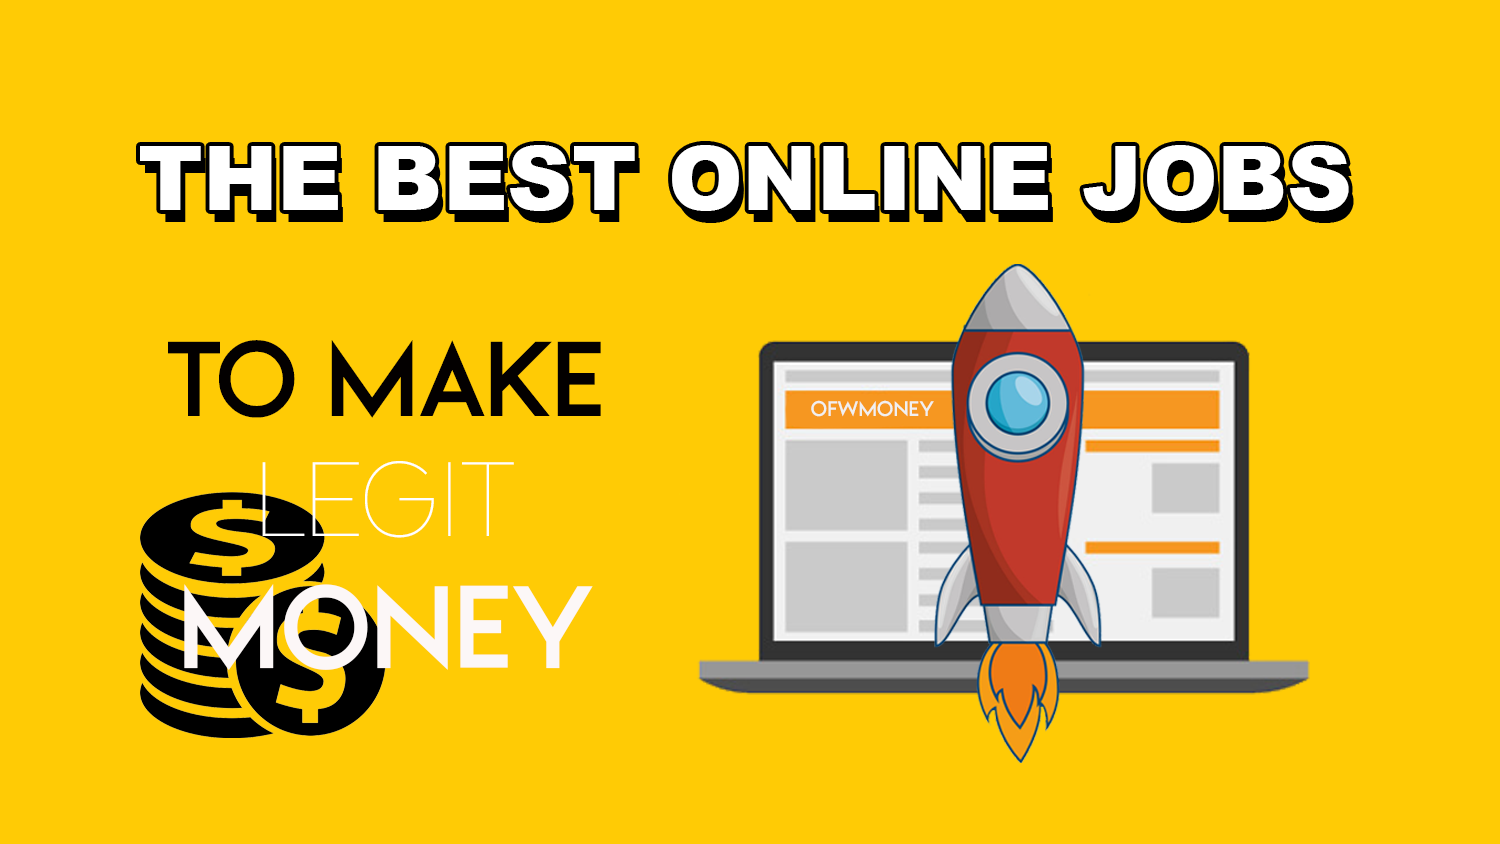 21 Online Jobs You Can Do at Home in 2021 - nTask